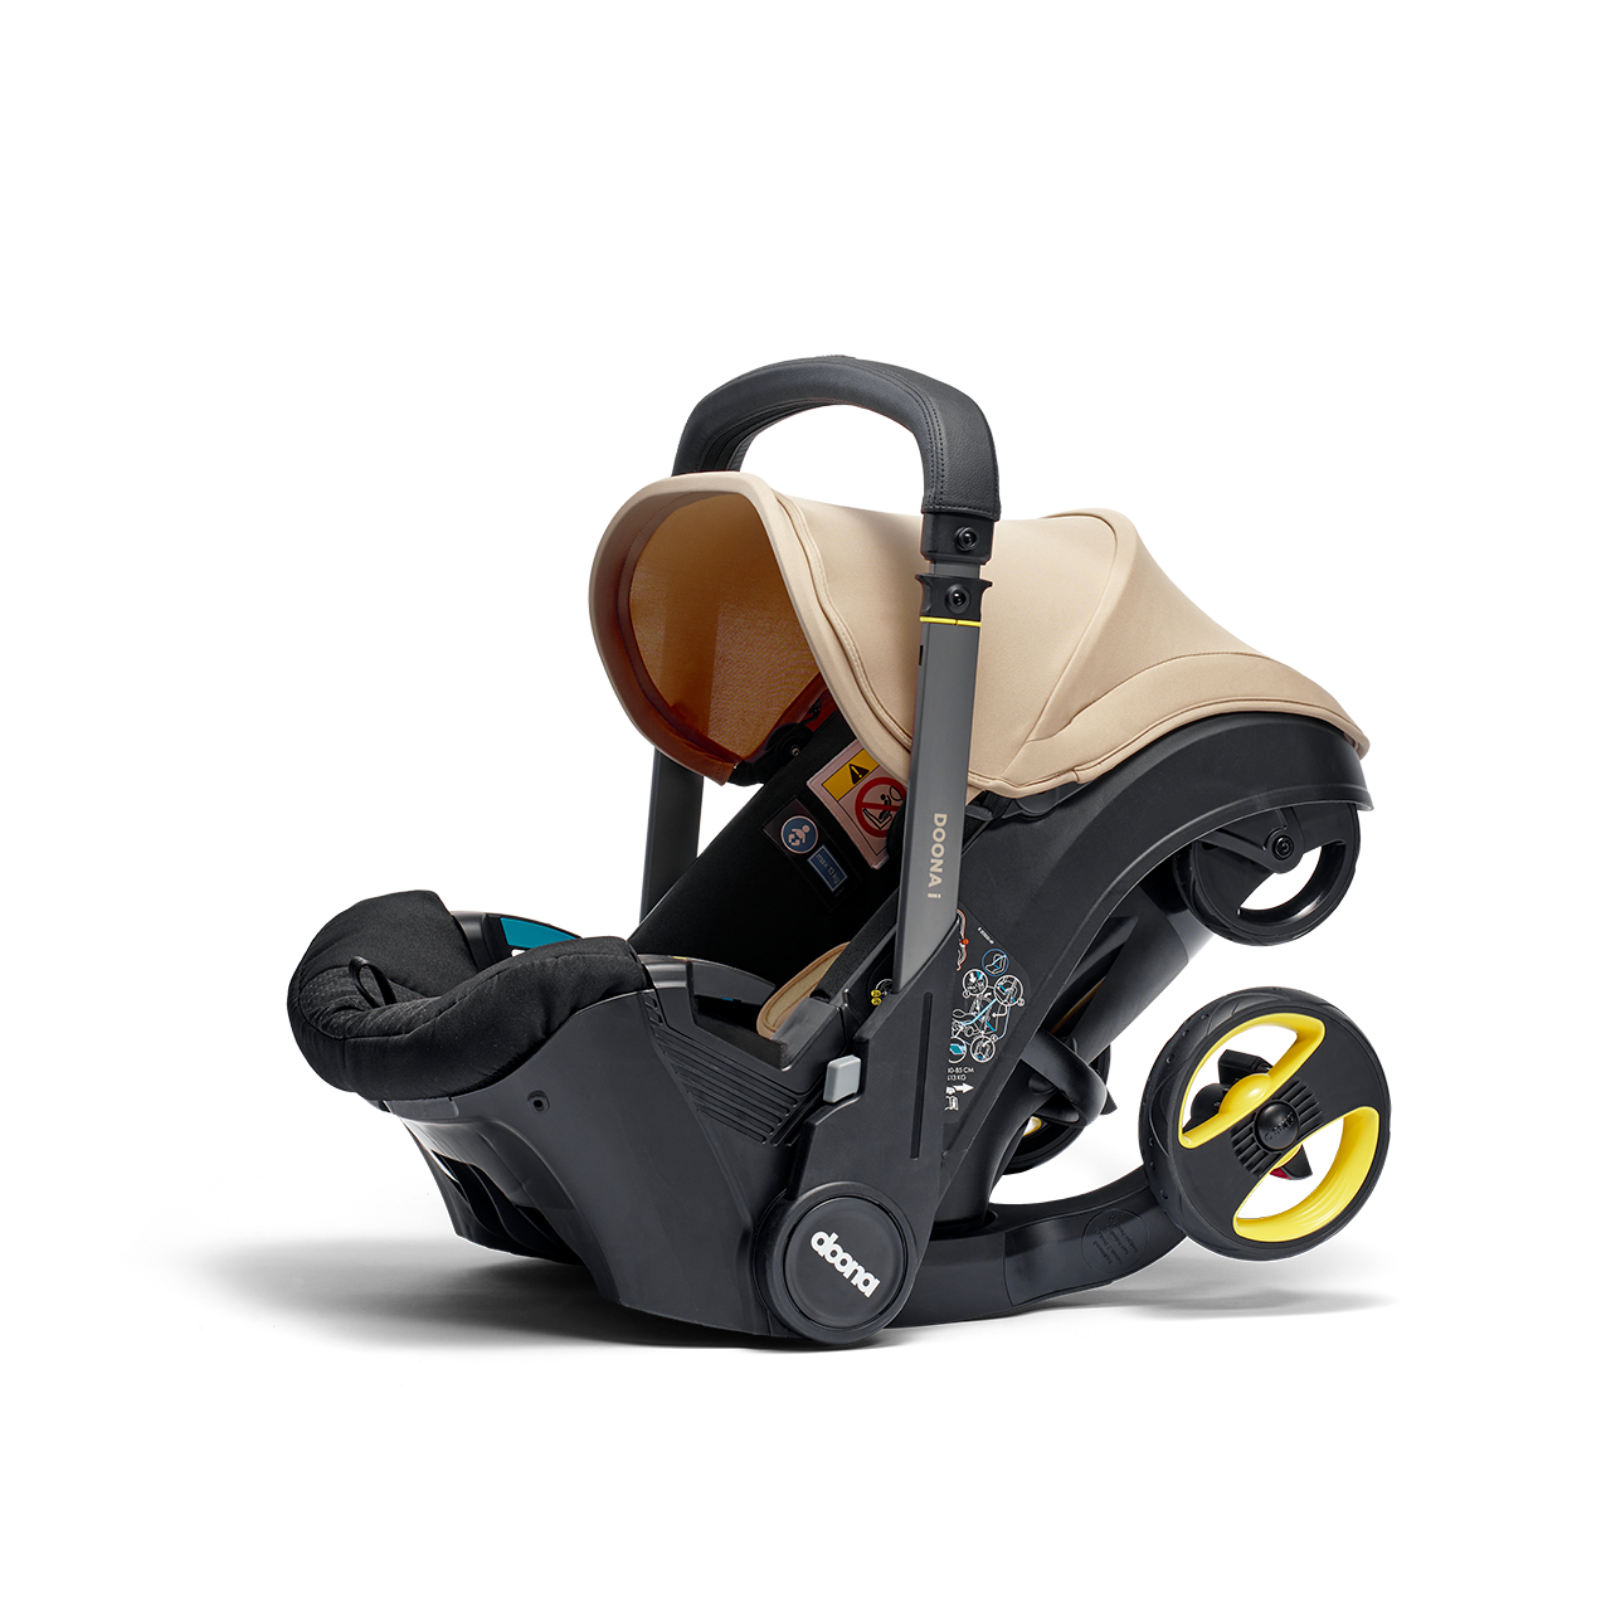 Doona i infant Car Seat - Sahara Sand - For Your Little One